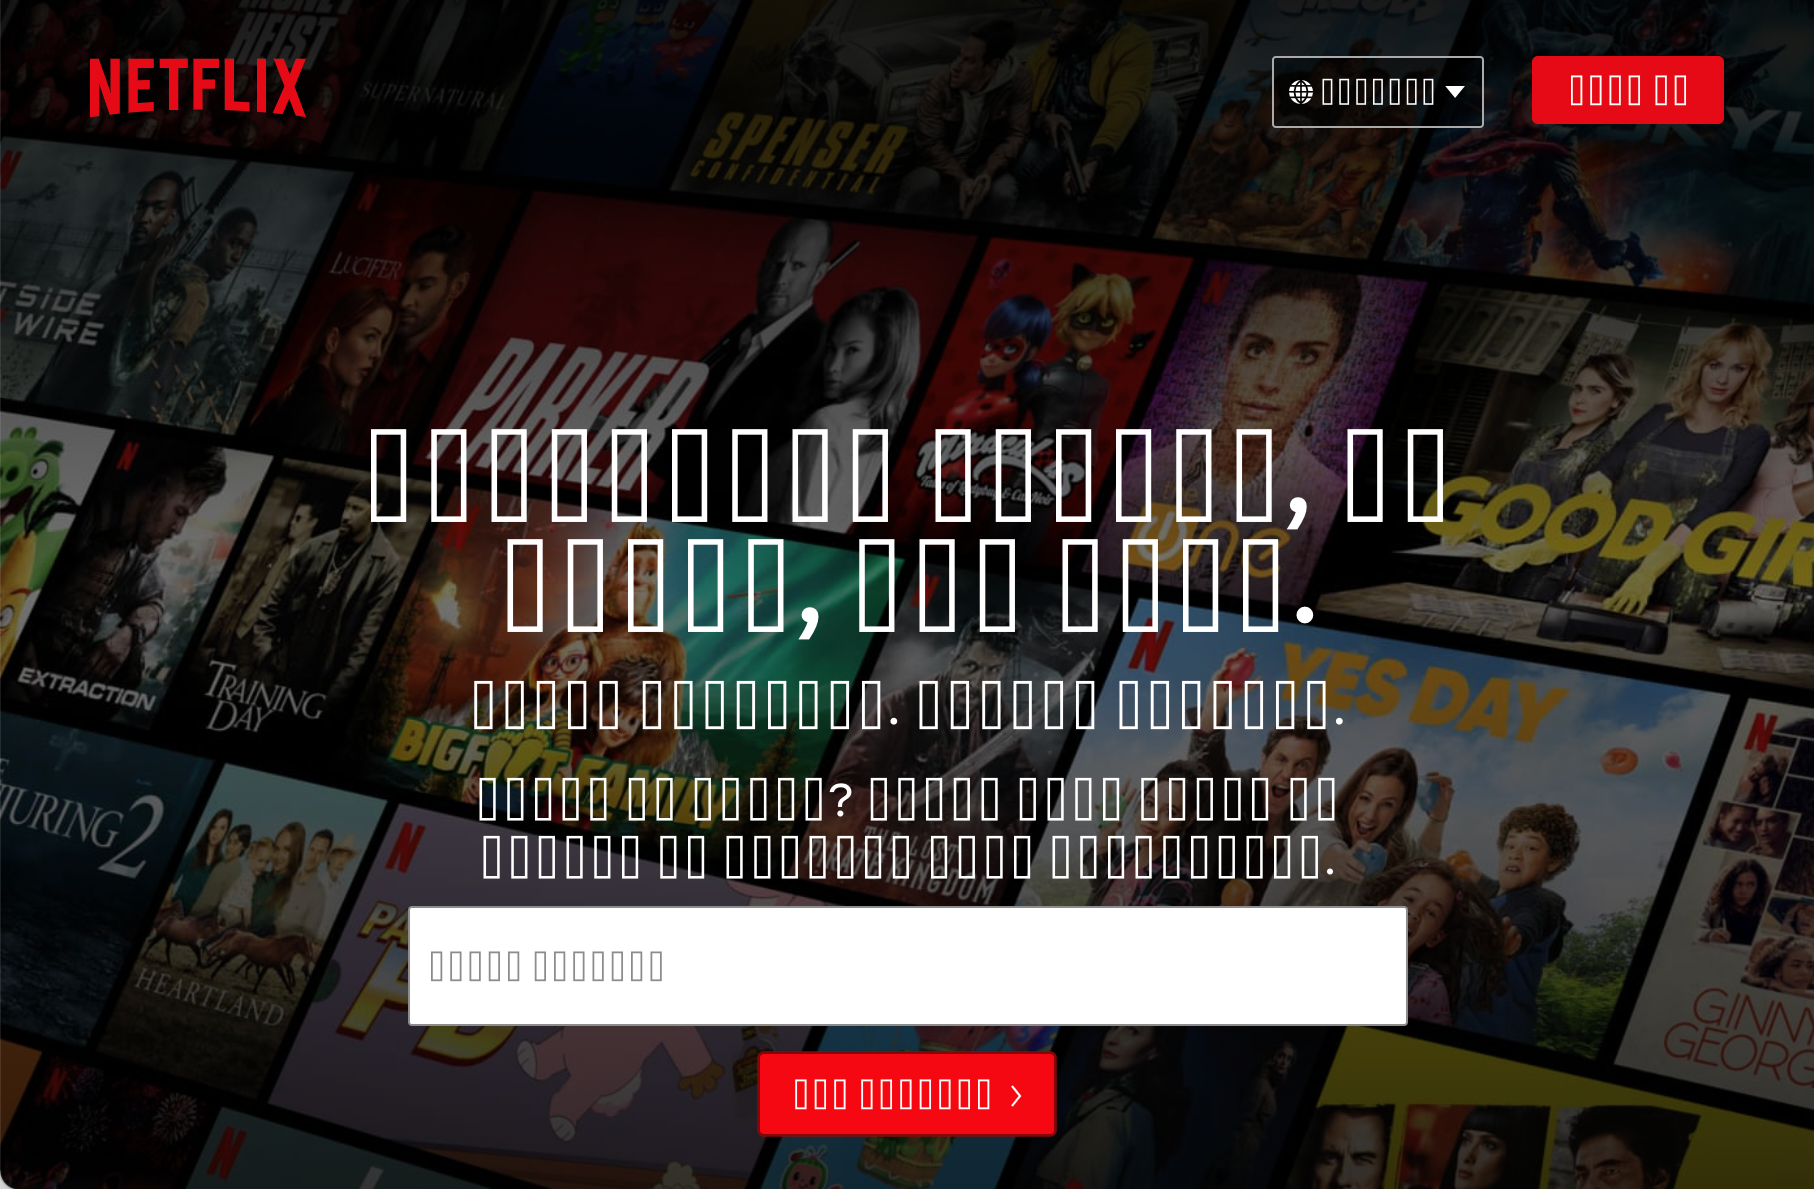 Screenshot of the Netflix homepage. Each letter has been replaced by a square tofu glyph character.